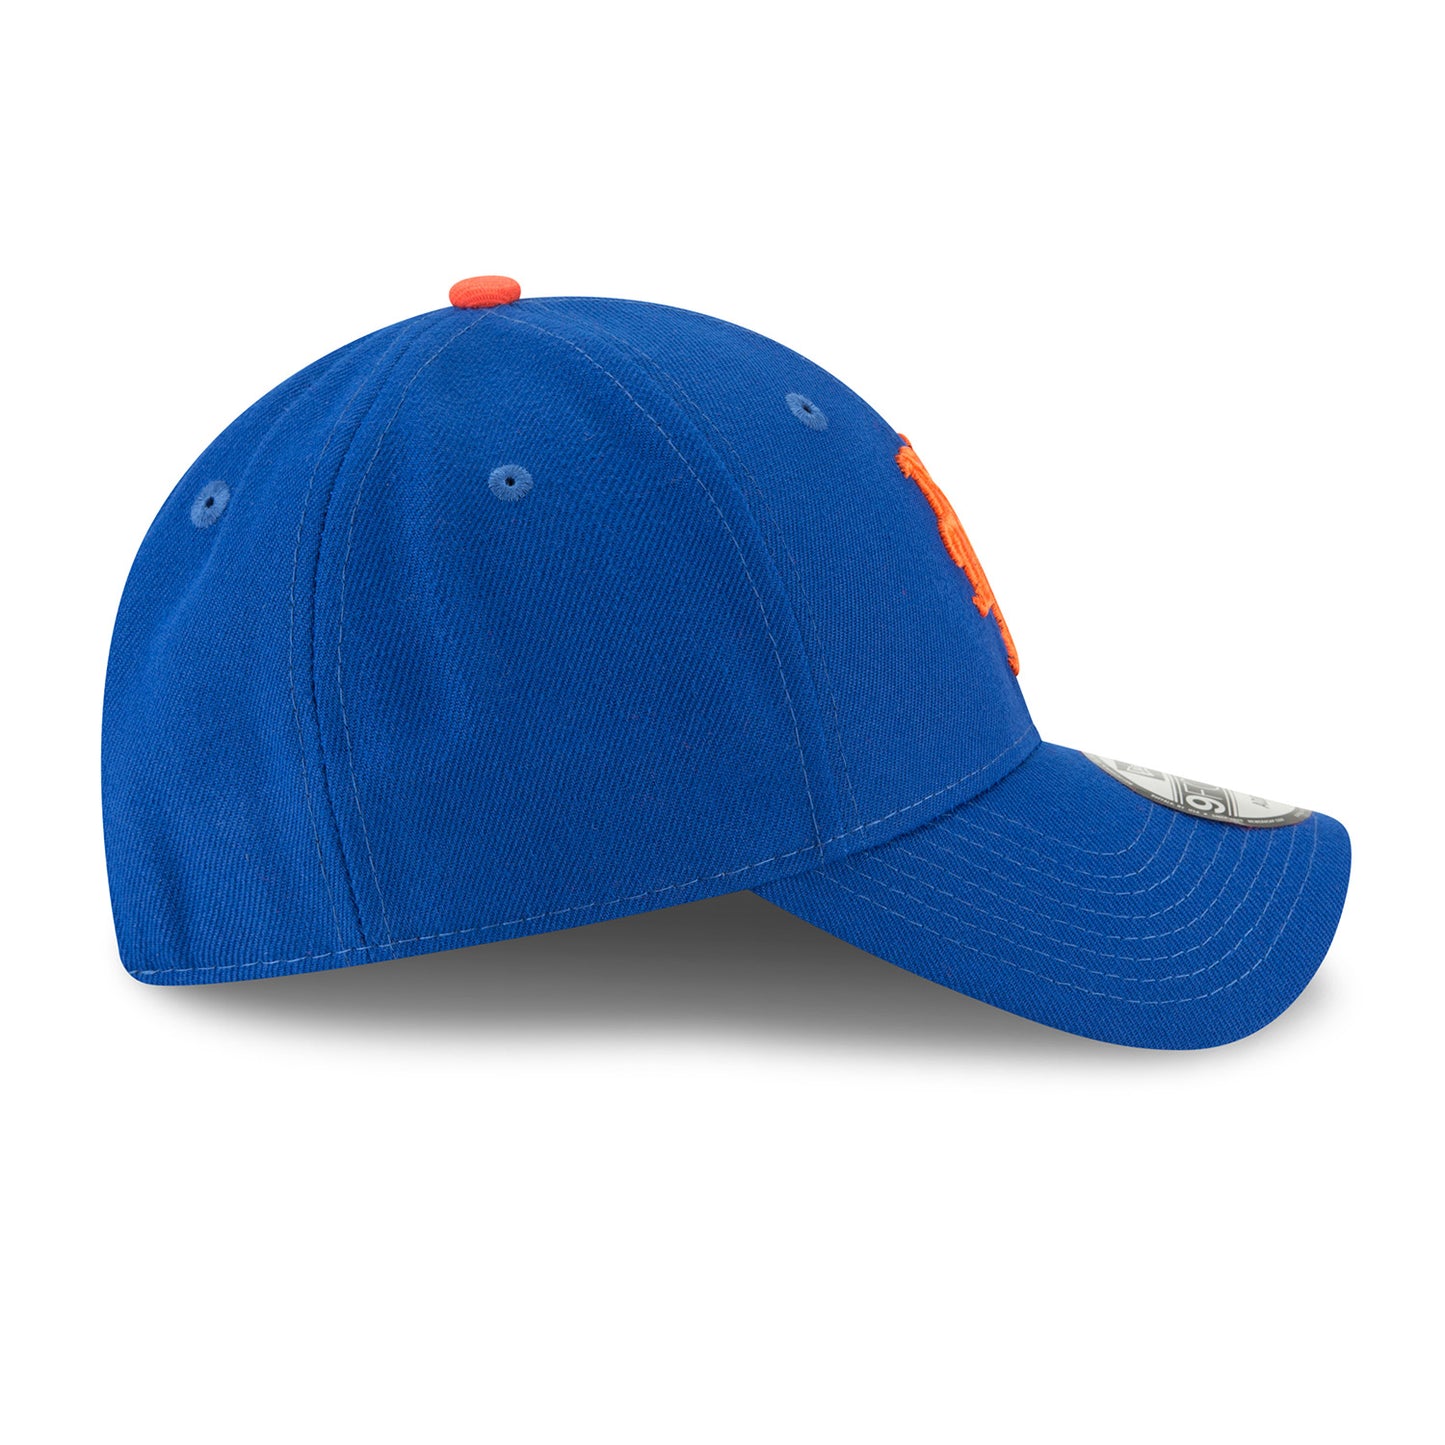 THE LEAGUE New York Mets 9FORTY New Era Cap